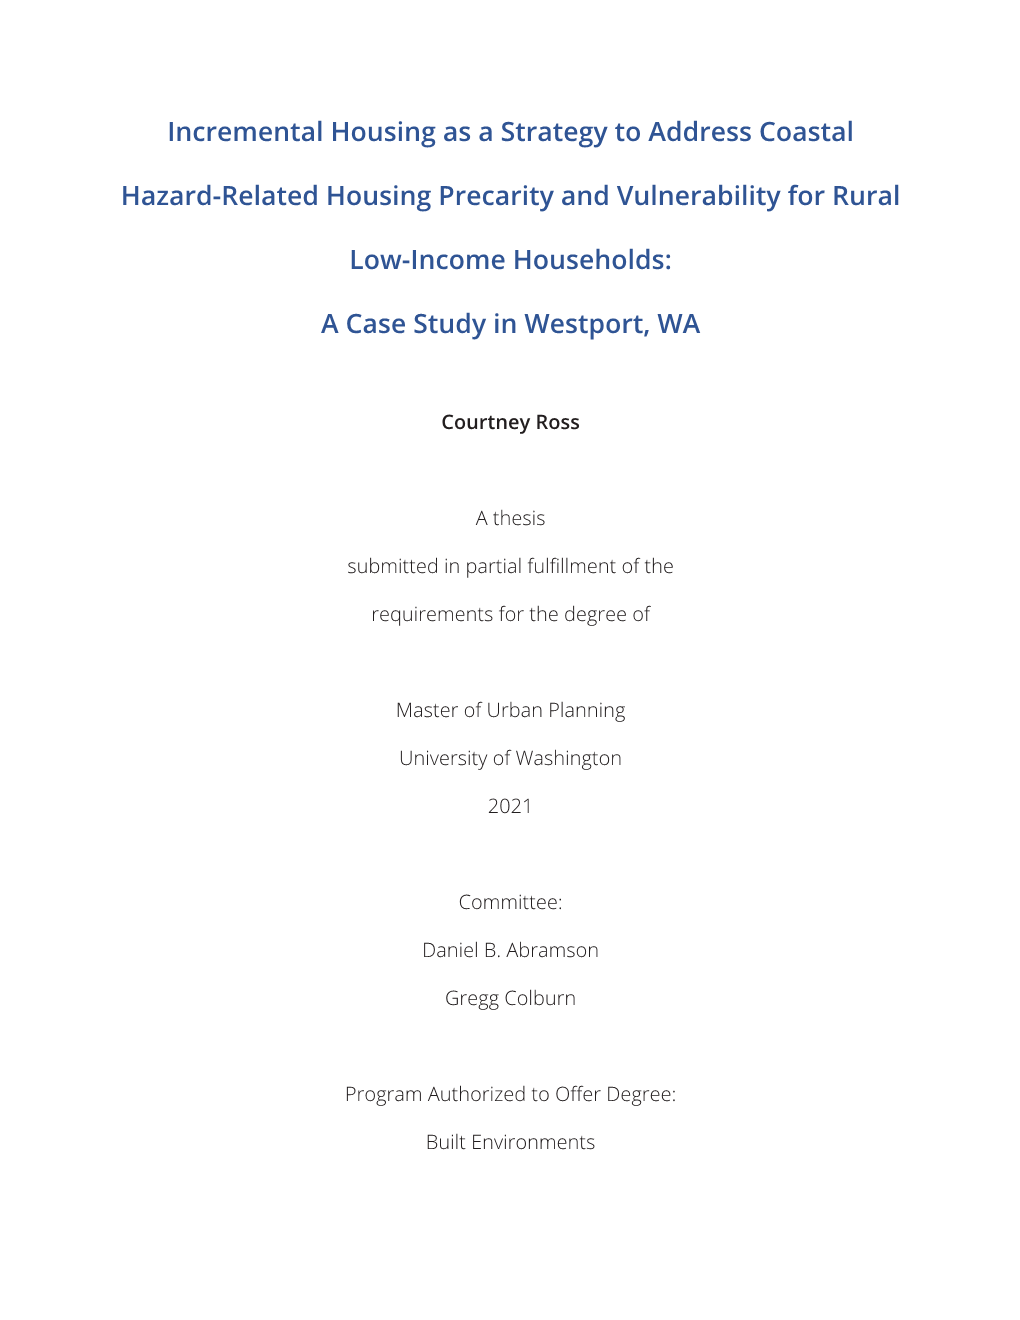 Incremental Housing As a Strategy to Address Coastal Hazard-Related Housing